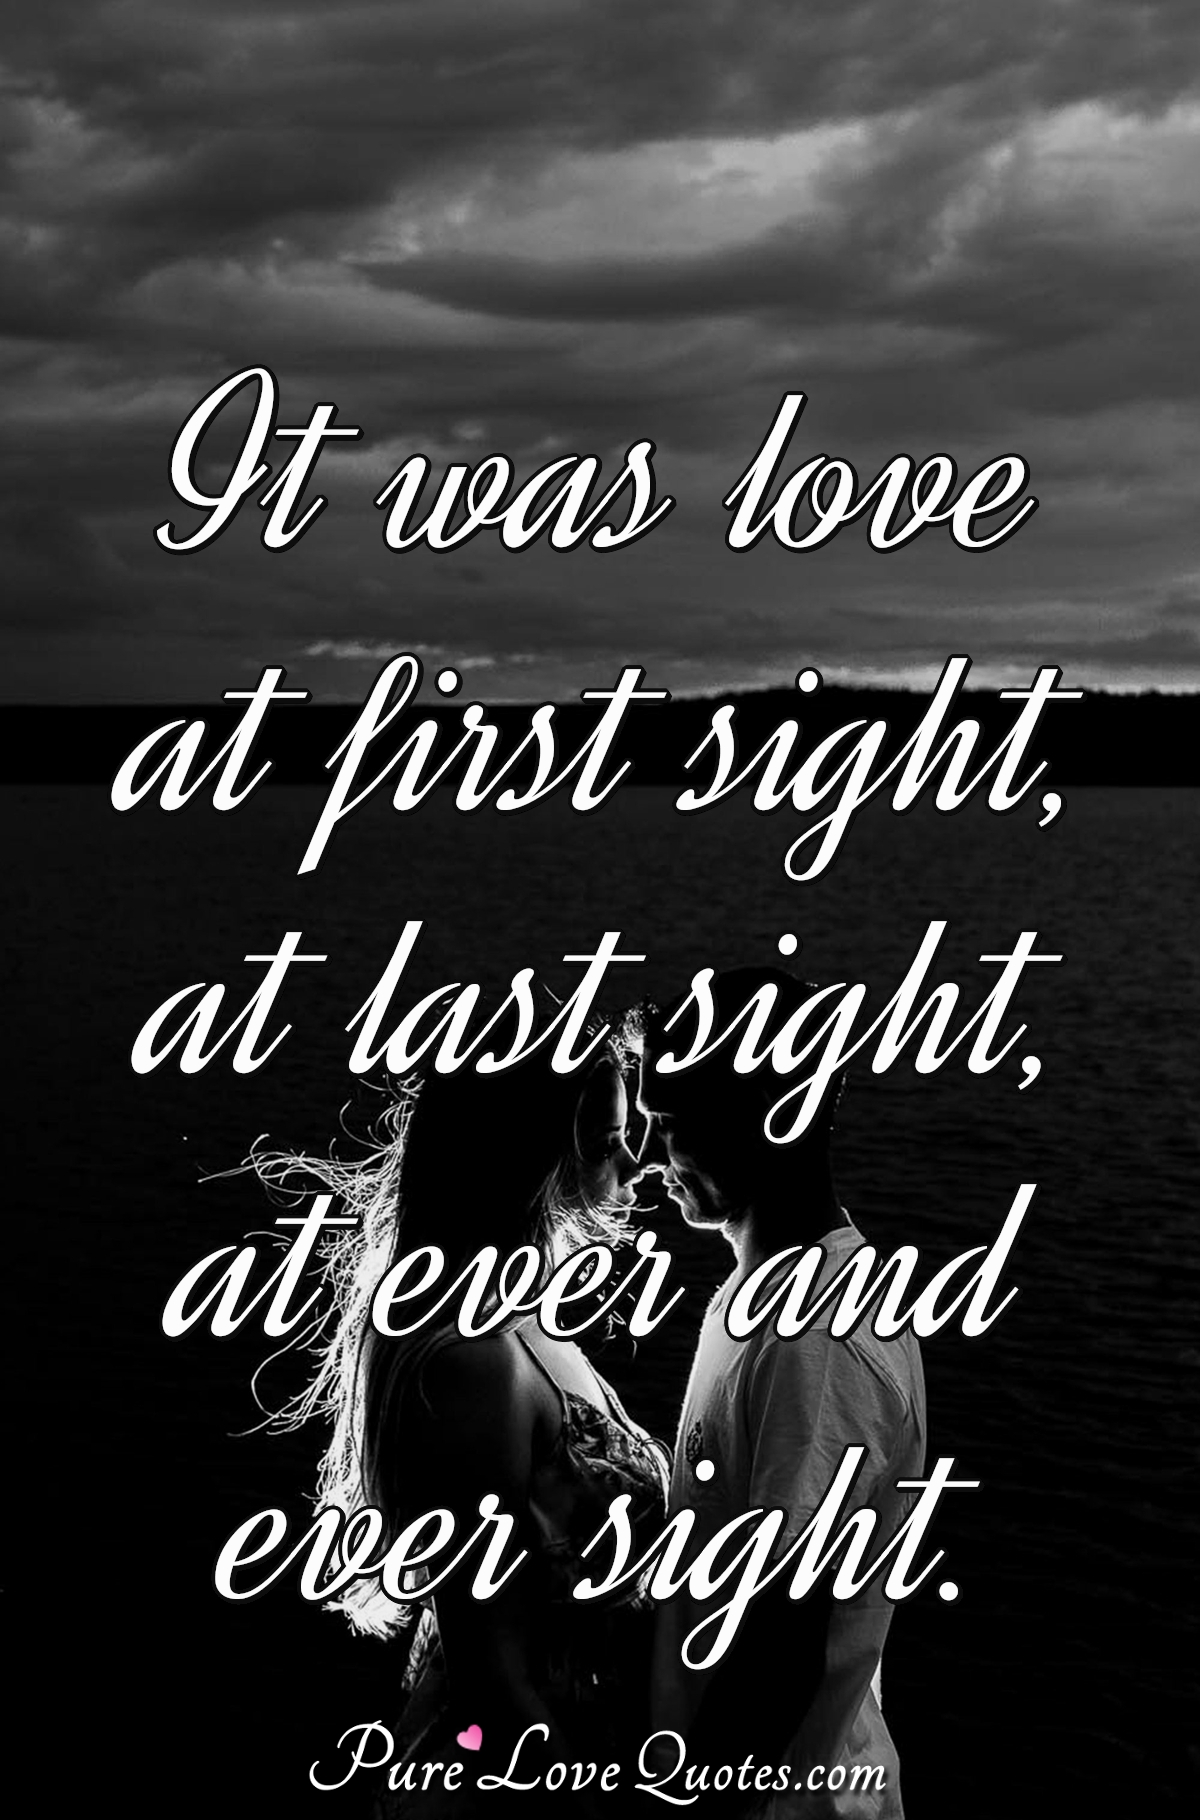 It was love at first sight, at last sight, at ever and ever sight. - Anonymous